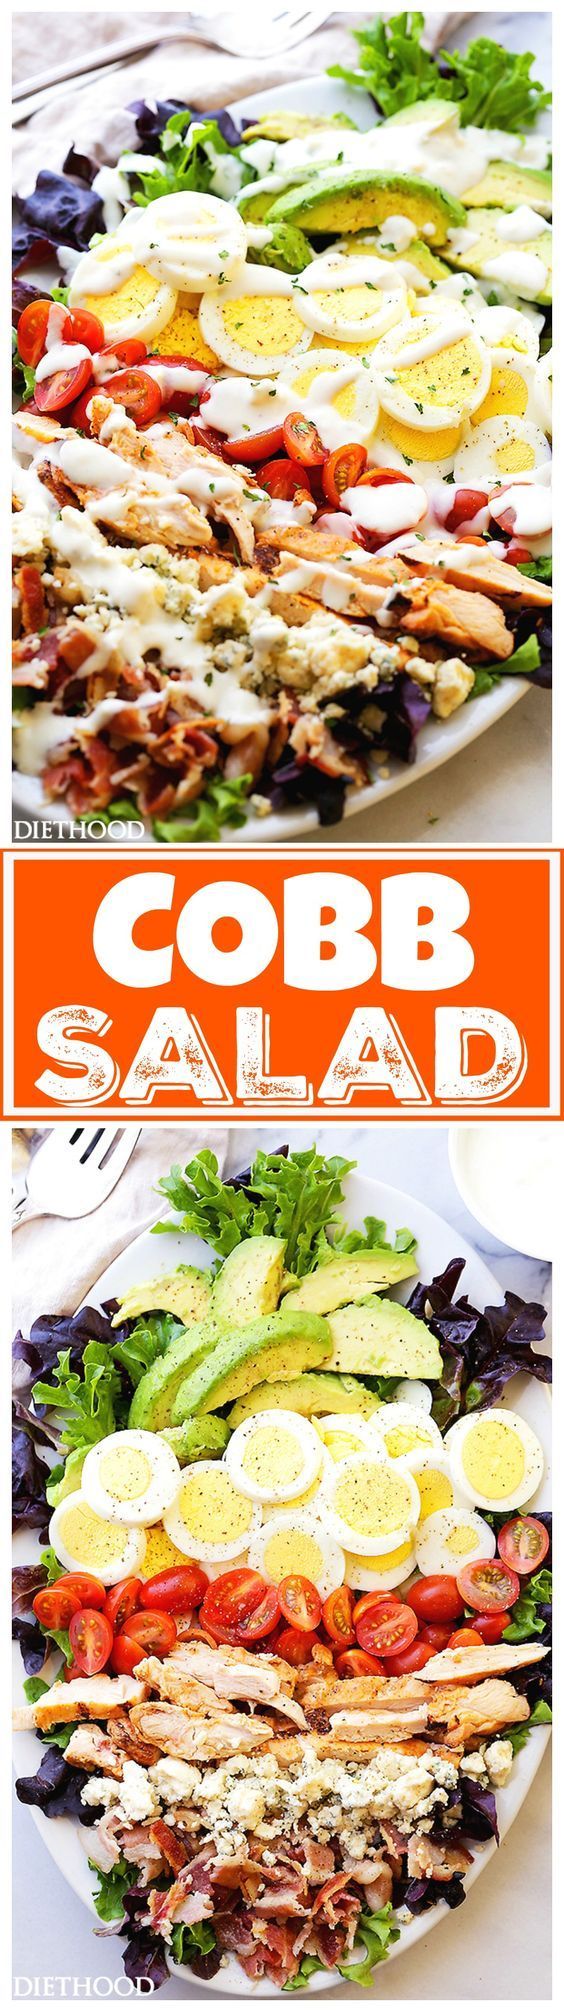 Cobb Salad Recipe – This classic American main-dish salad is packed with chicken, avocado, sweet tomatoes,